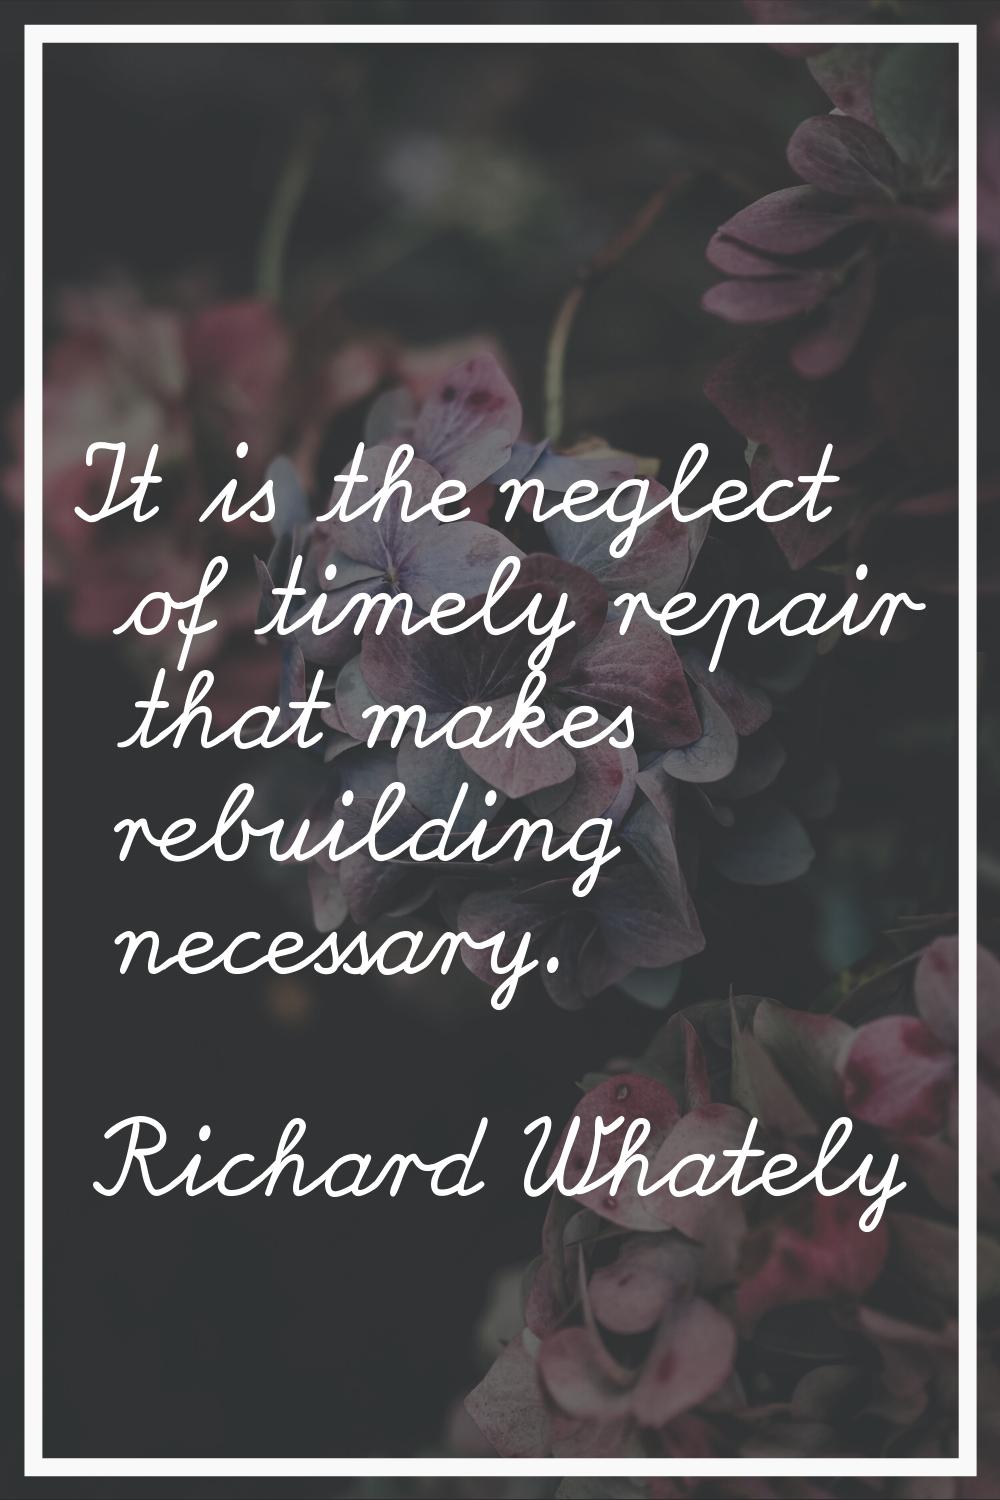 It is the neglect of timely repair that makes rebuilding necessary.